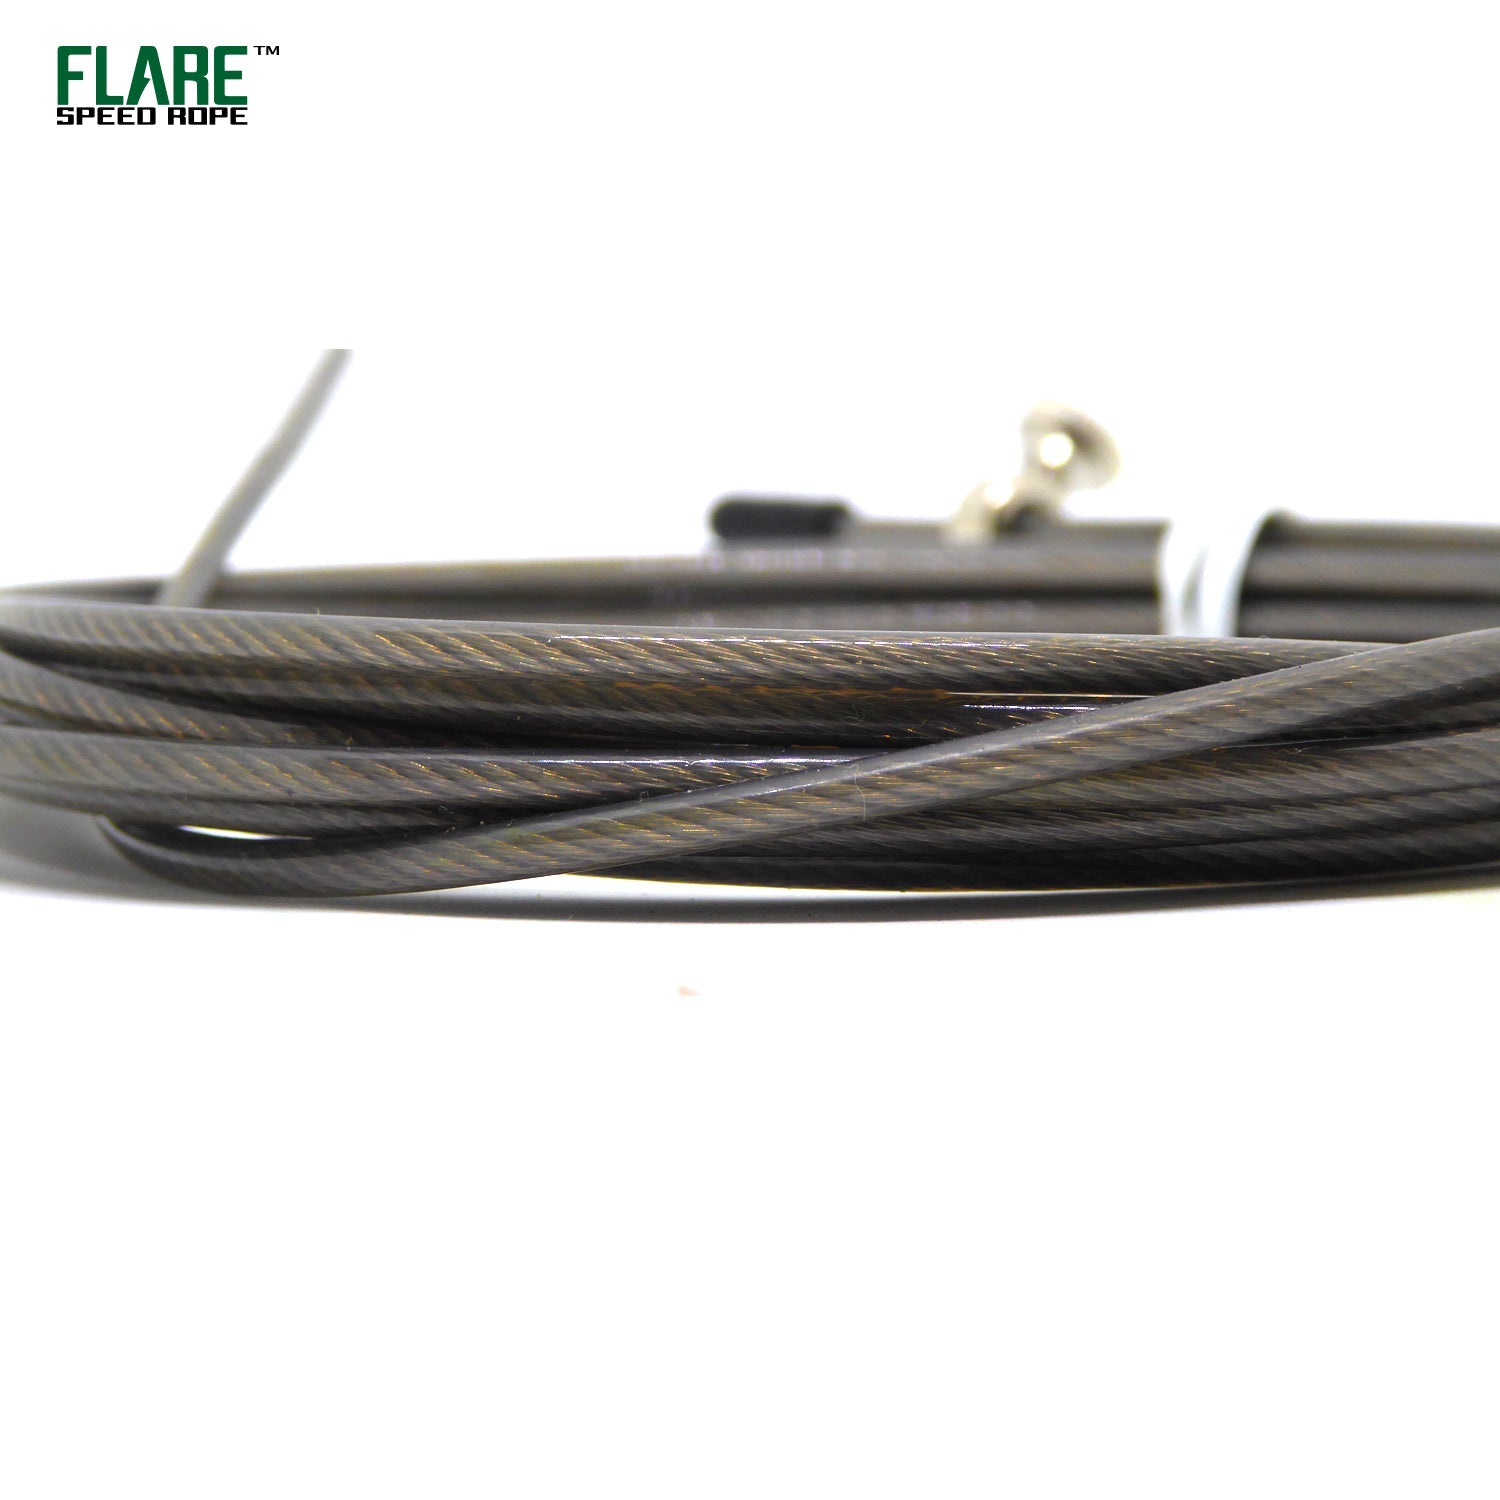 Flare replacement speed rope cables grey pvc cable